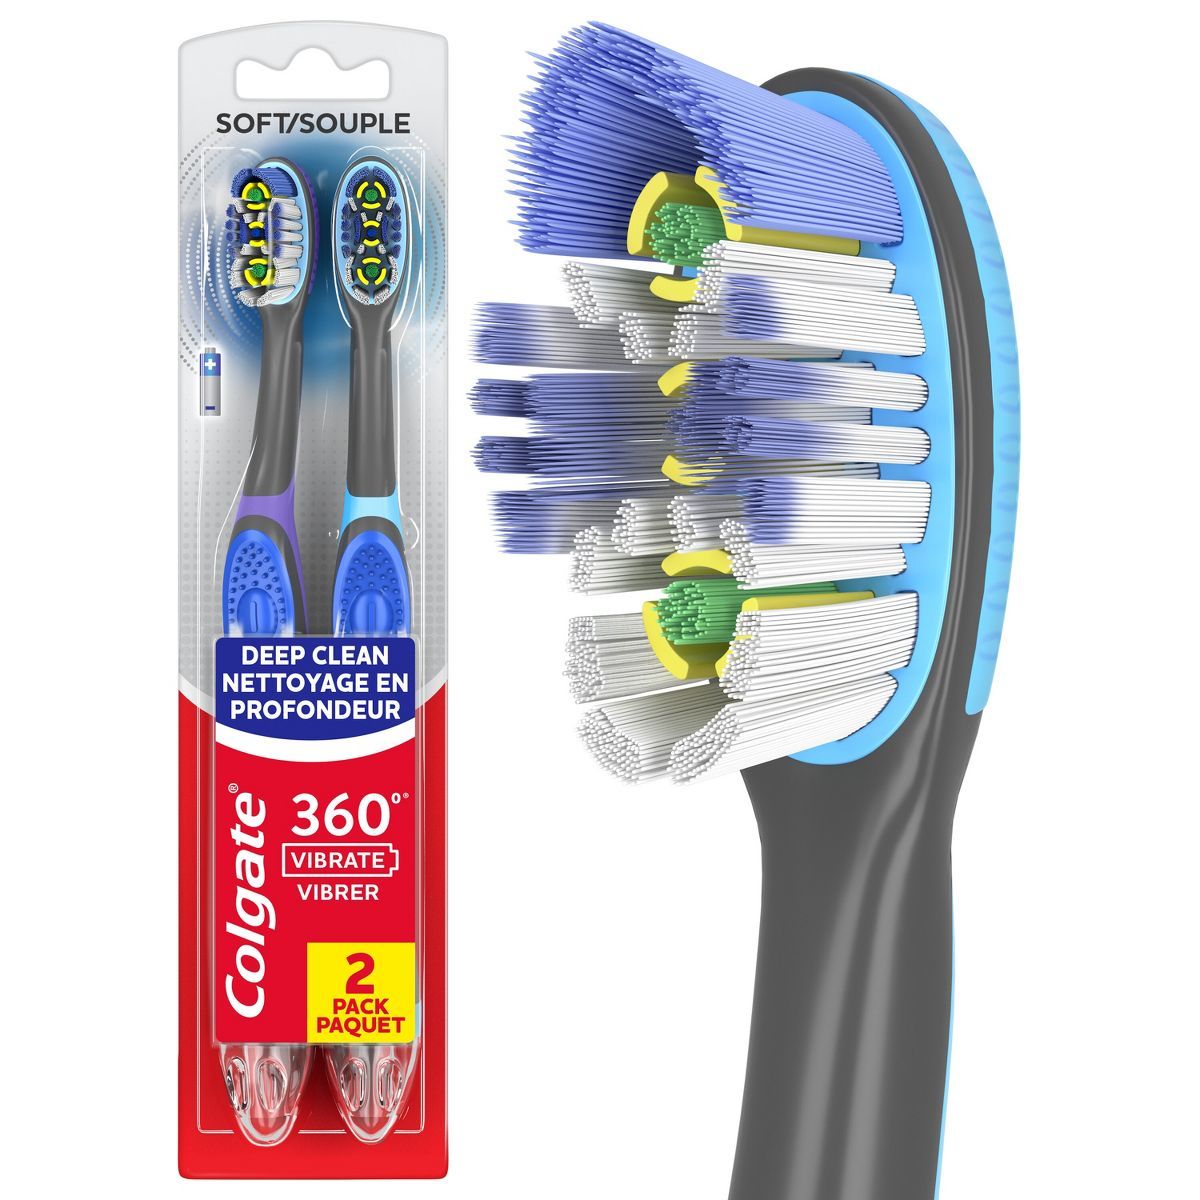 Colgate 360 Total Advanced Floss-Tip Sonic Powered Vibrating Toothbrush Soft | Target